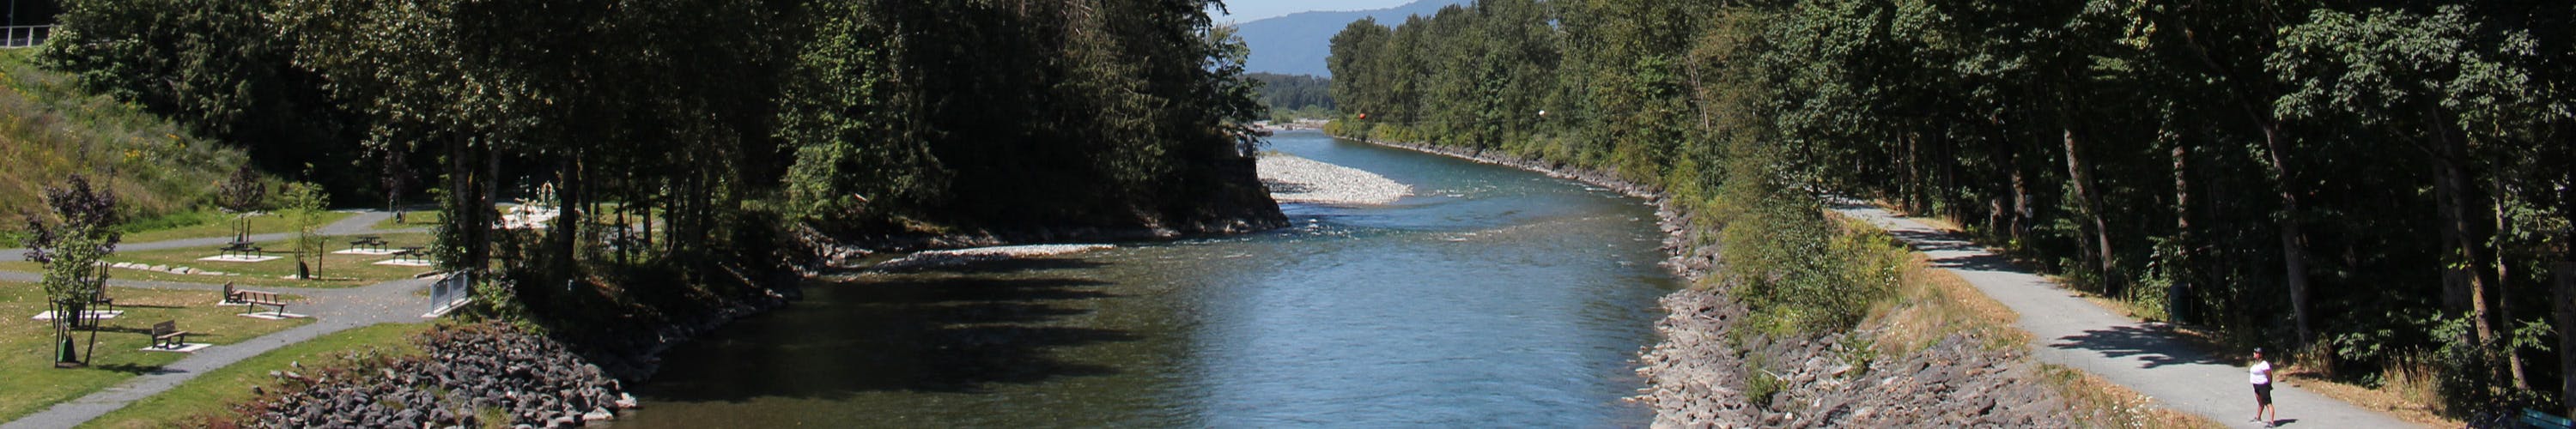 Looking east down the Vedder River. A person in a white t-shirt stands on the Rotary Trail on the right, looking at Crossing Park across the river.